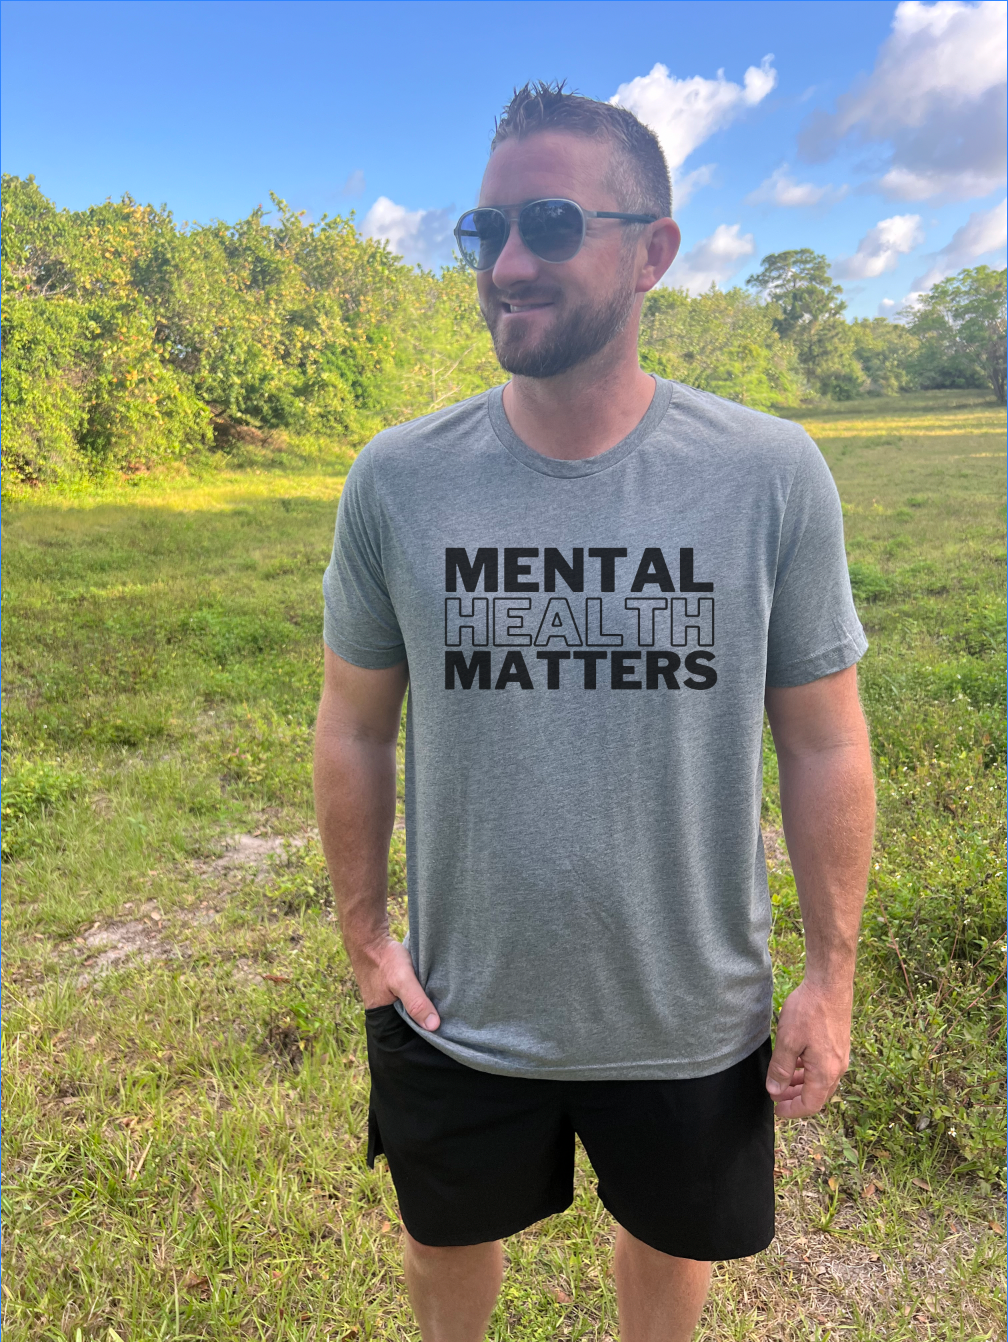 'Mental Health Matters' Block Printed Graphic Tee: Prep Obsessed x Weather With Lauren (Ships in 2-3 Weeks)